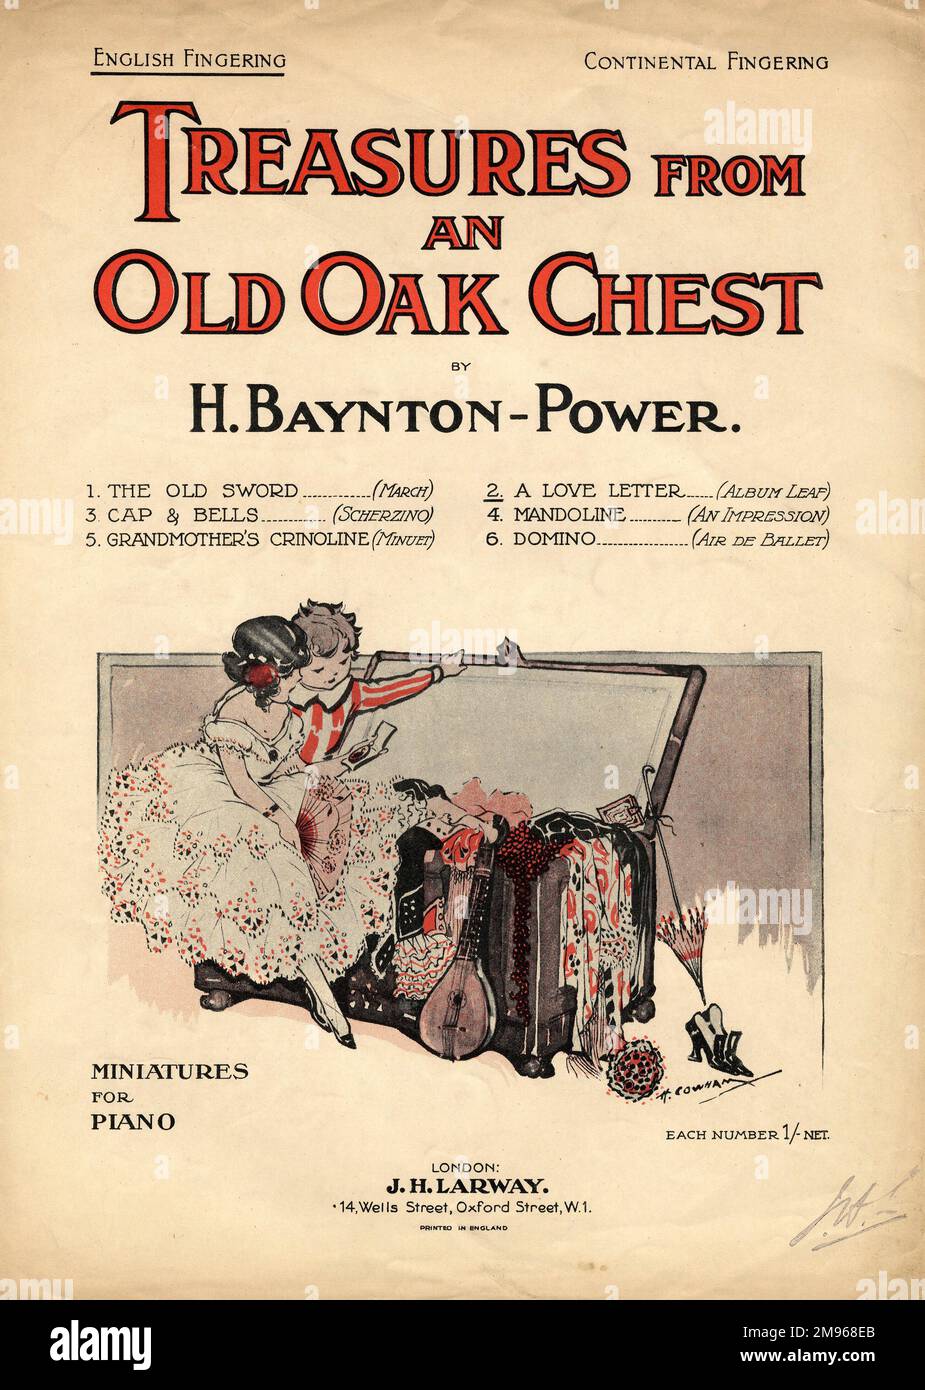 Cover design for a book of piano music for children, Treasures from an Old Oak Chest, Miniatures for Piano by H Baynton-Power.  There are six pieces in total: The Old Sword (a march), Cap & Bells (scherzino or little scherzo), Grandmother's Crinoline (minuet), A Love Letter, Mandoline, and Domino (air de ballet).  Two children, a girl and a boy, are depicted looking through the contents of the chest. Stock Photo